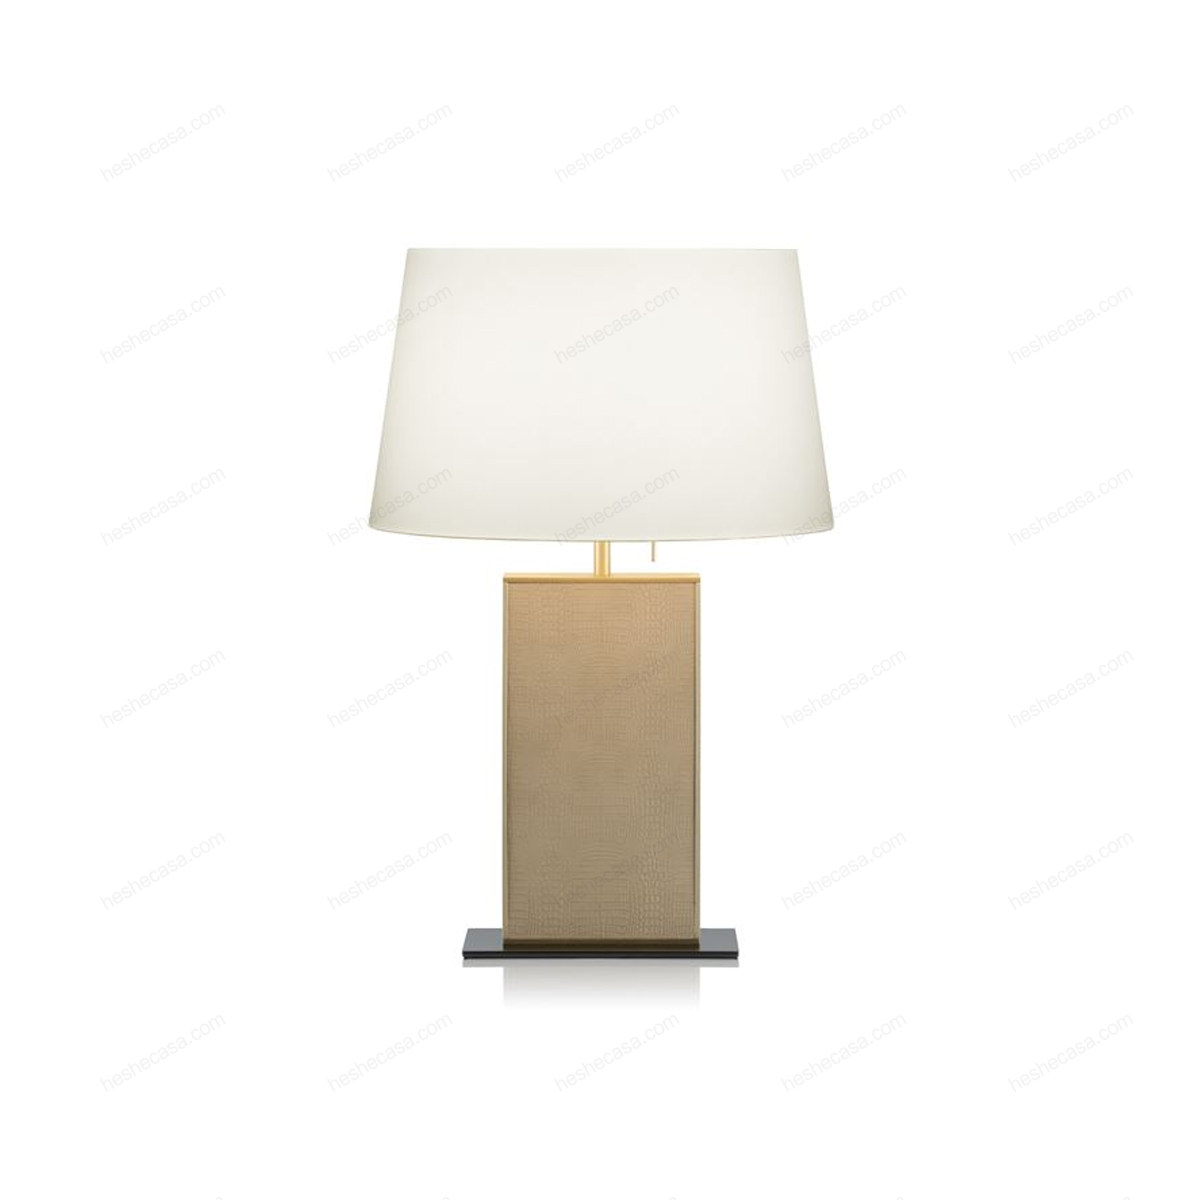 Dory Table Lamp台灯